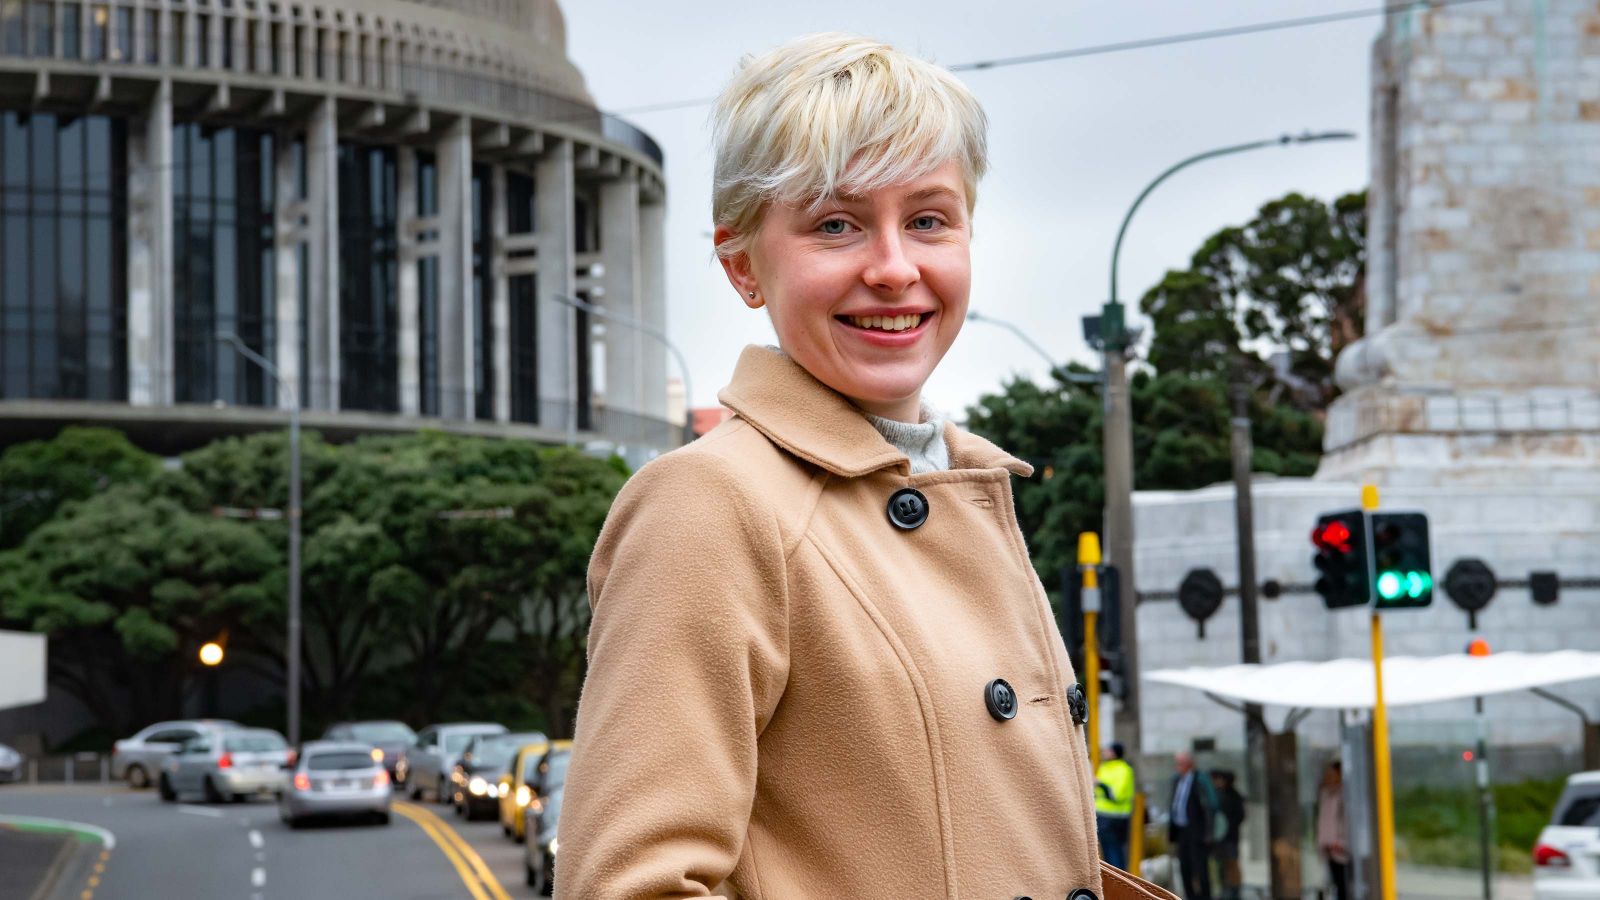 A student stands smiling in front of the Beehive in Wellington, New Zealand.